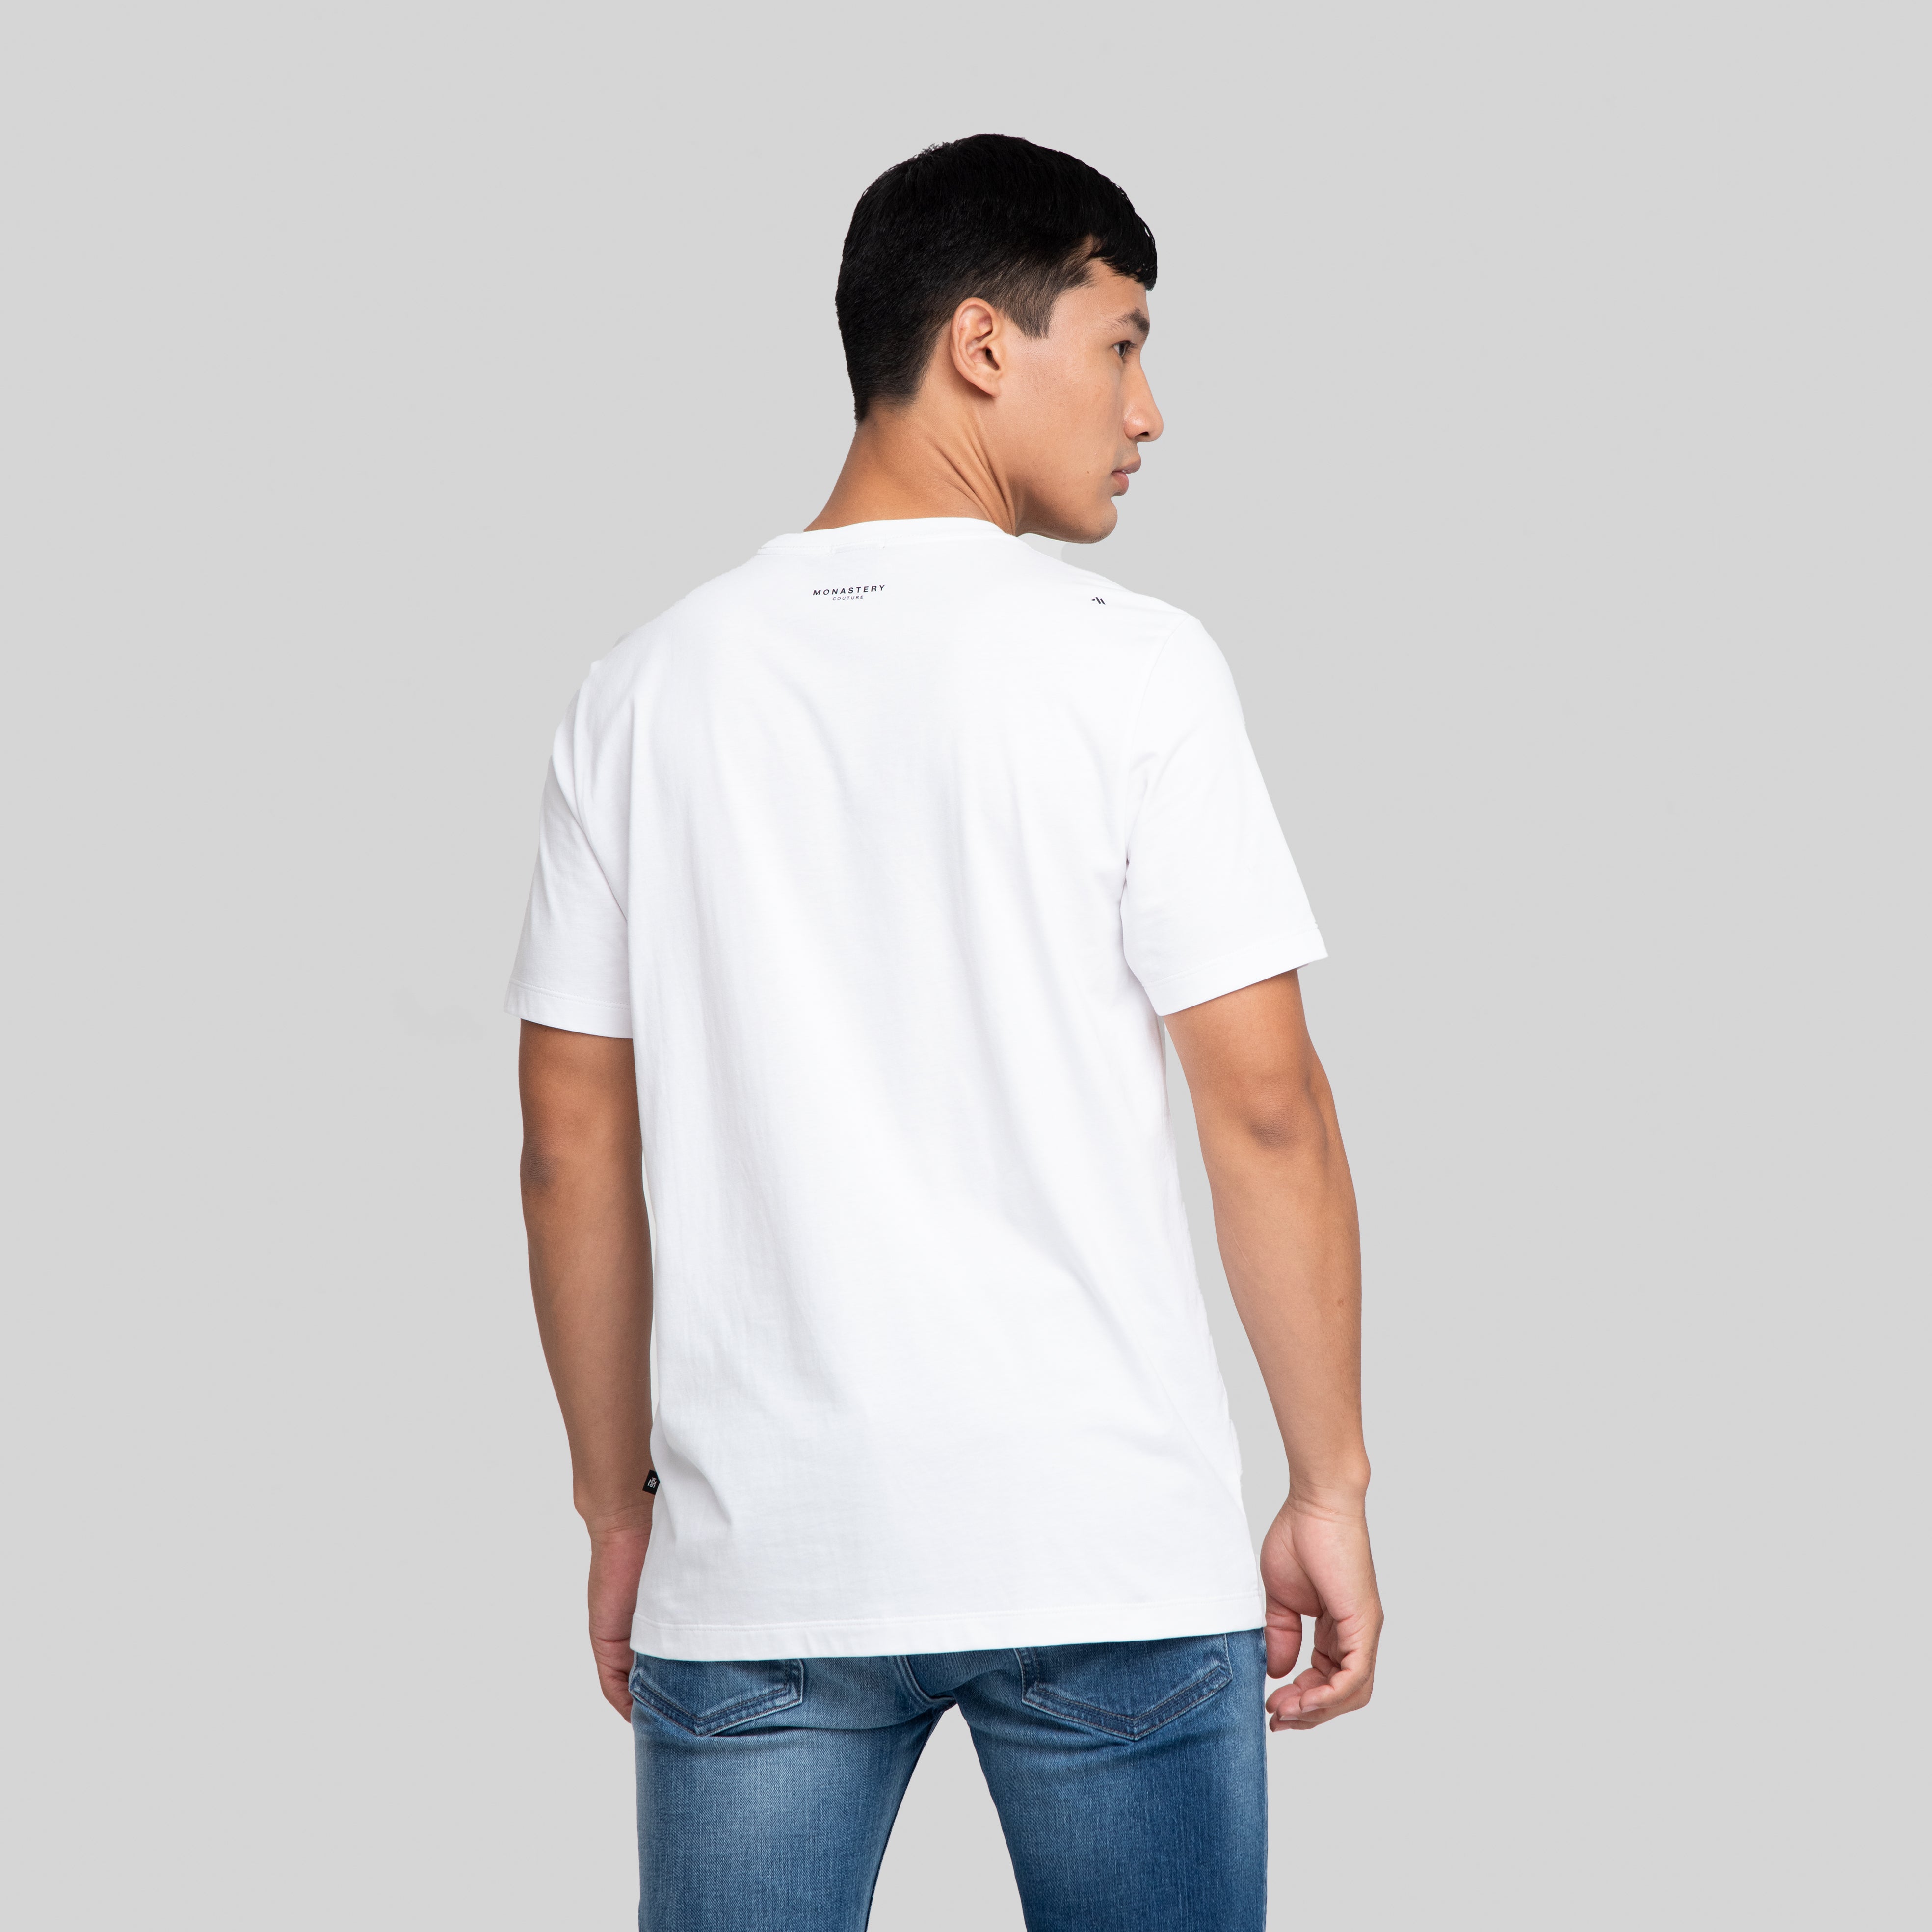 FORNAX WHITE T-SHIRT | Monastery Couture